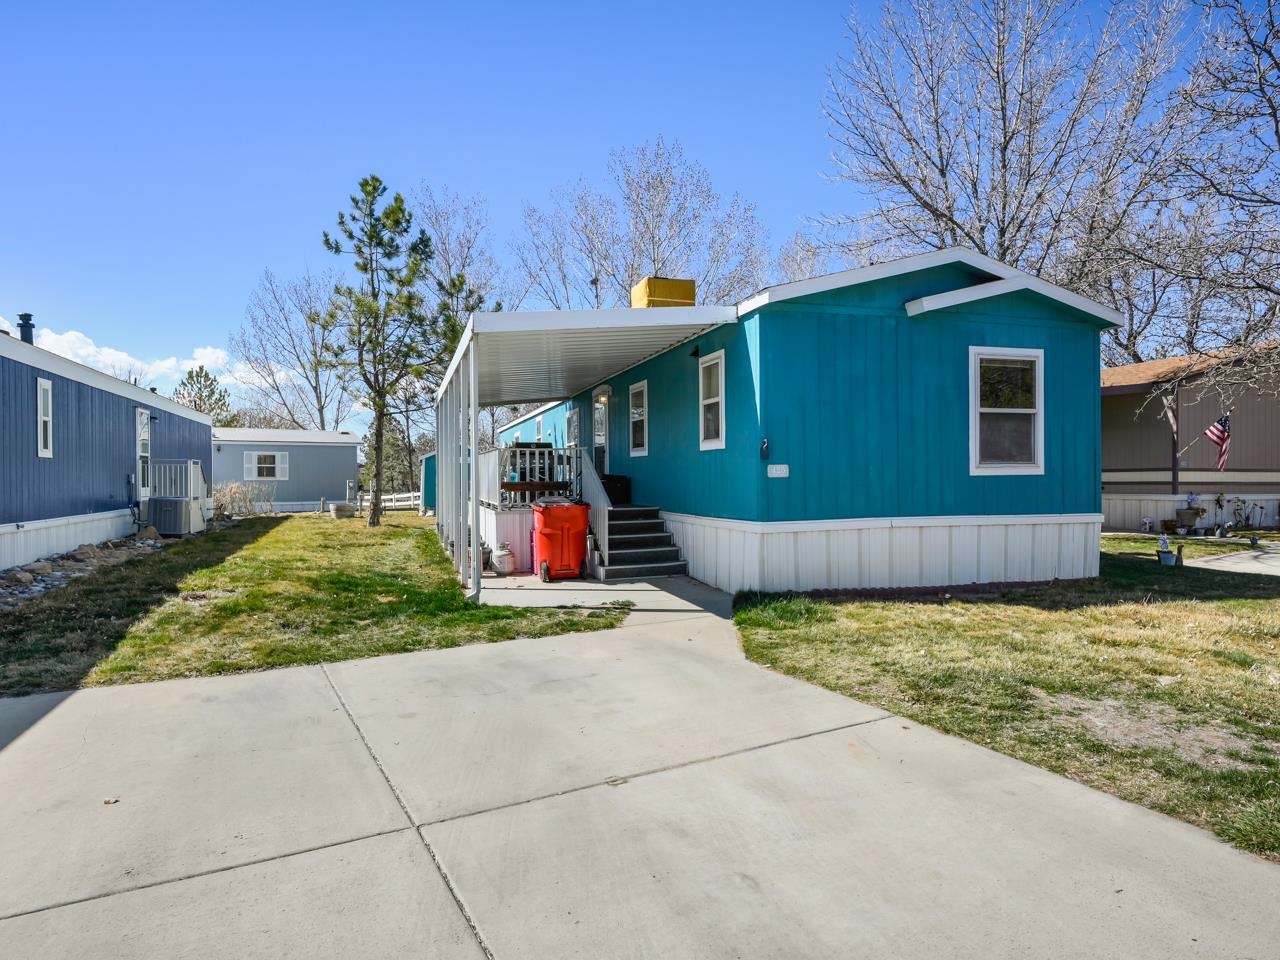 435 32 Road 425, Clifton, CO 81520